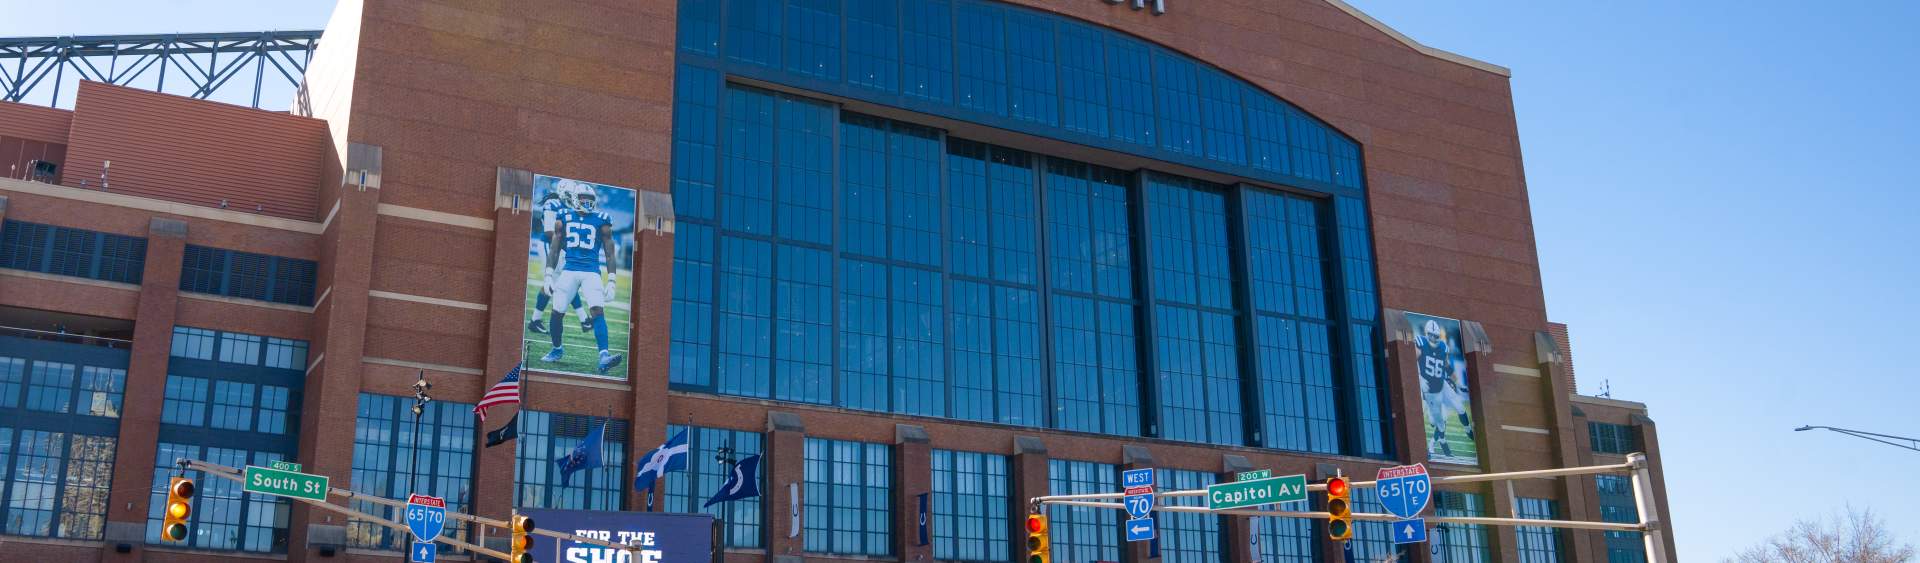 Lucas Oil Stadium not considering switch to natural grass, Colts exec says  – Inside INdiana Business